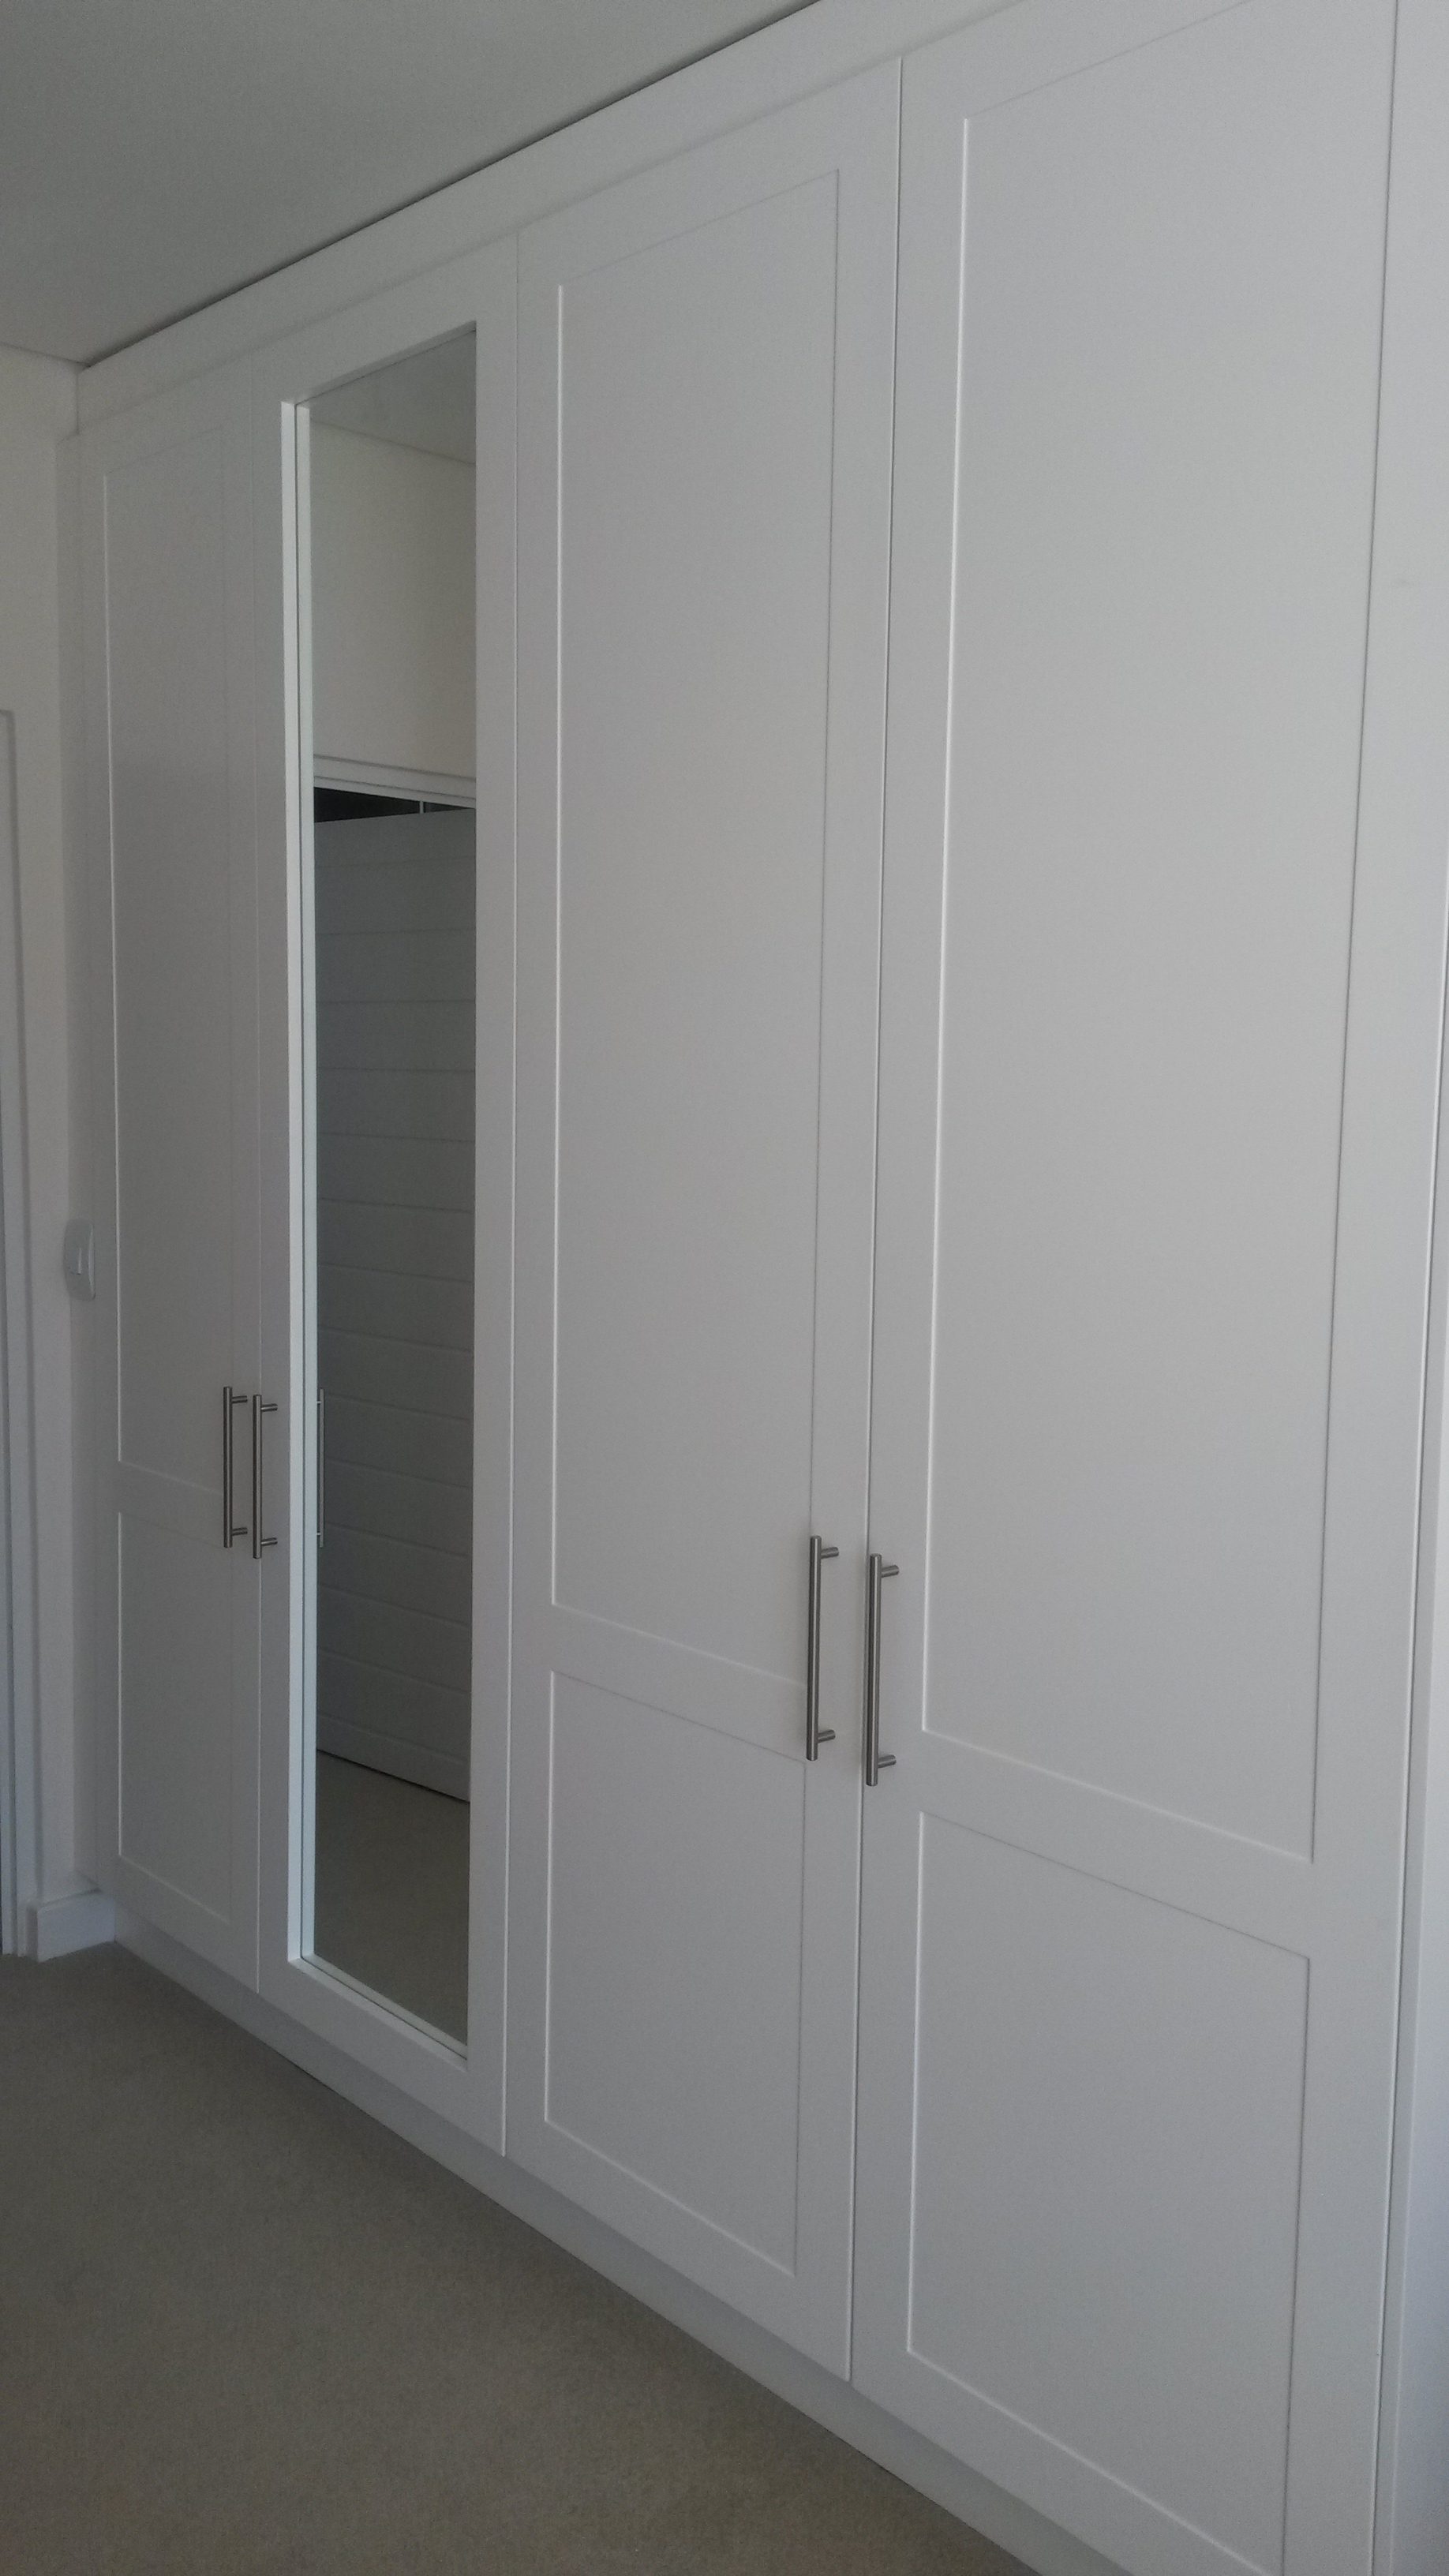 White spray painted shaker doors with full mirror in frame